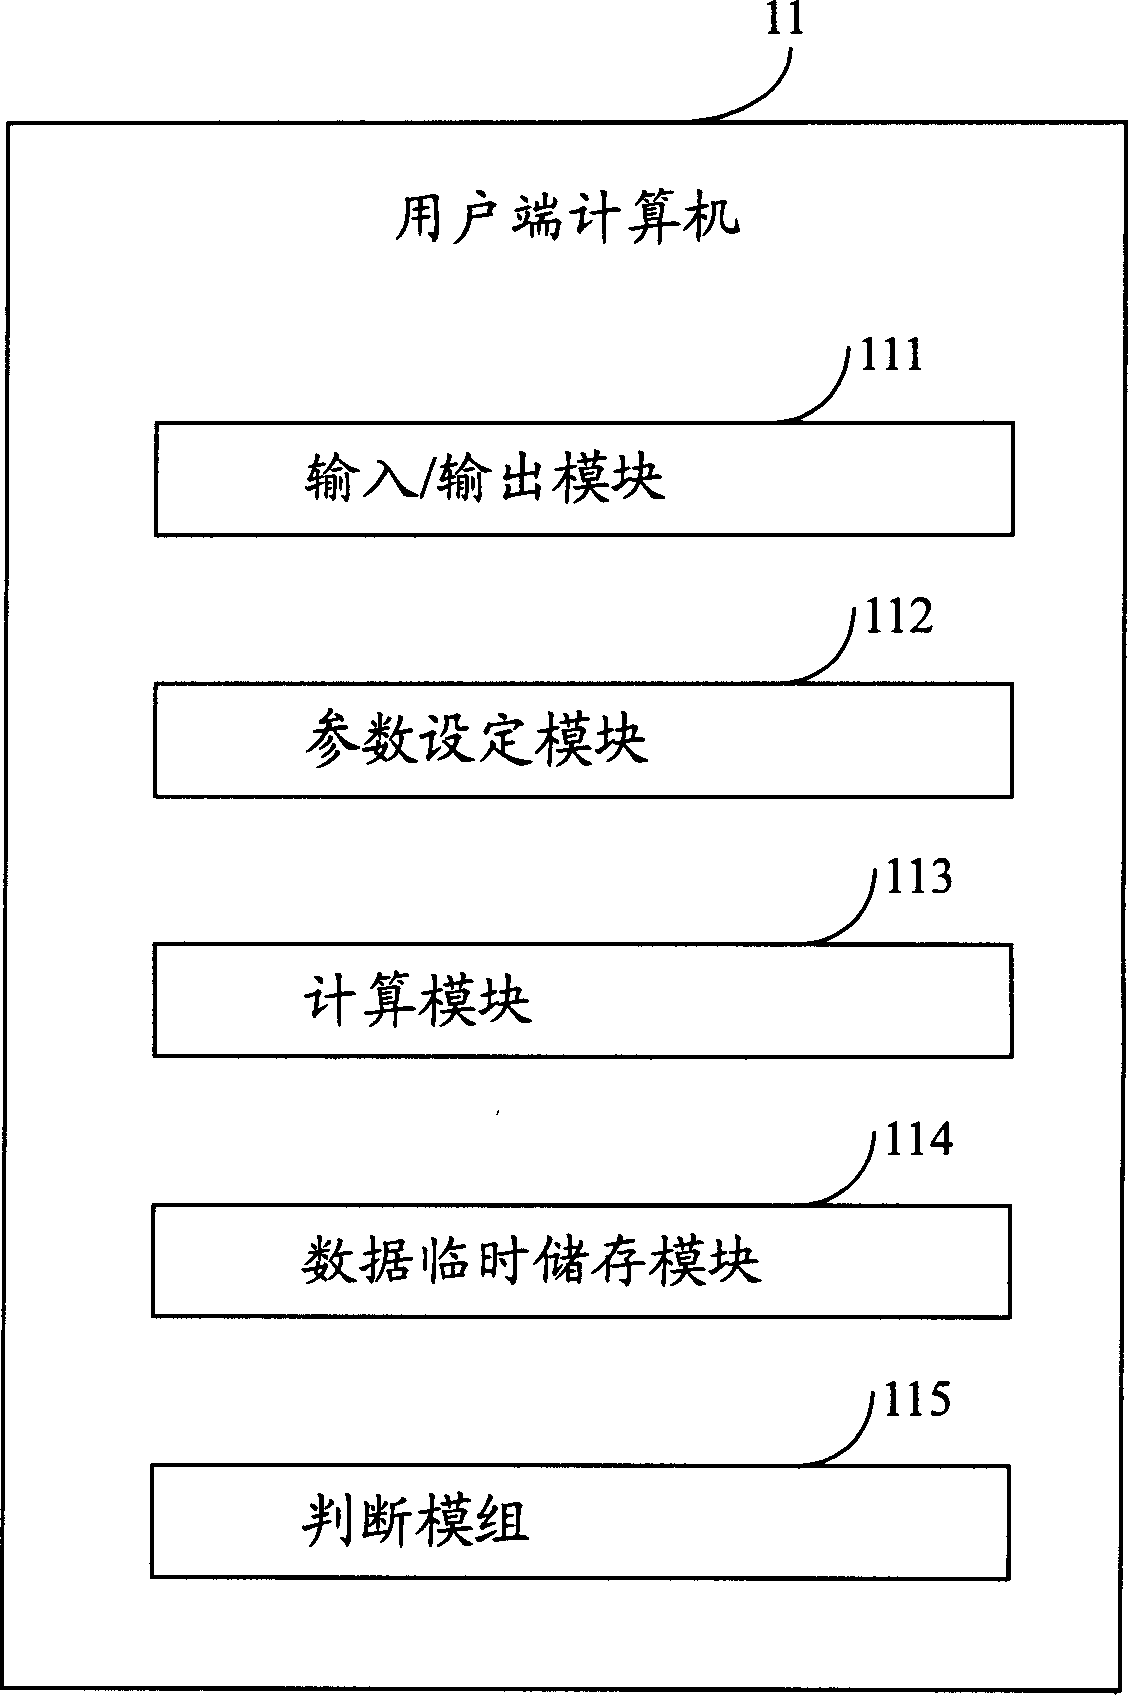 Automatic image focusing system and method